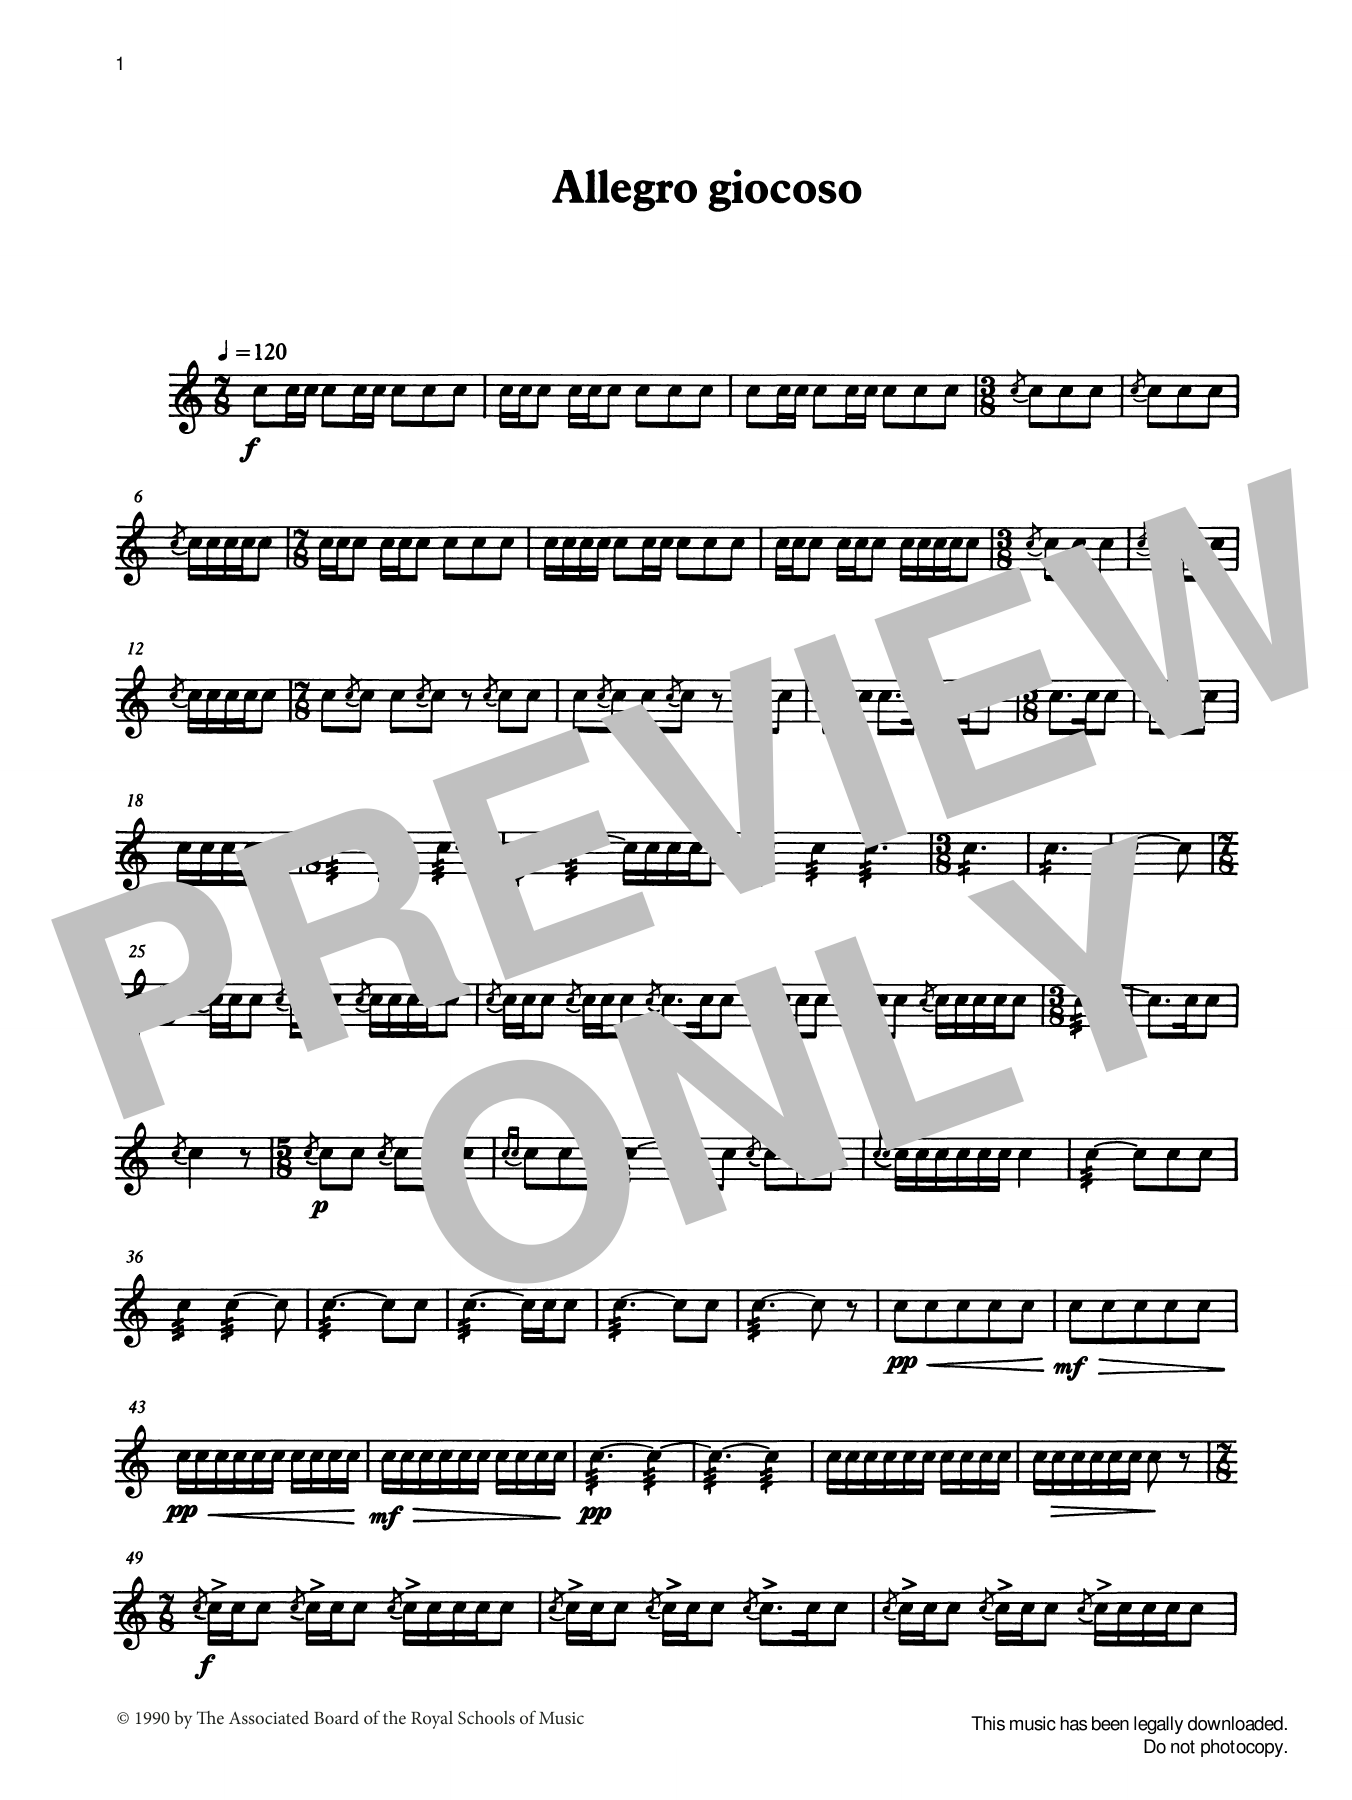 Download Ian Wright and Kevin Hathaway Allegro giocoso from Graded Music for S Sheet Music